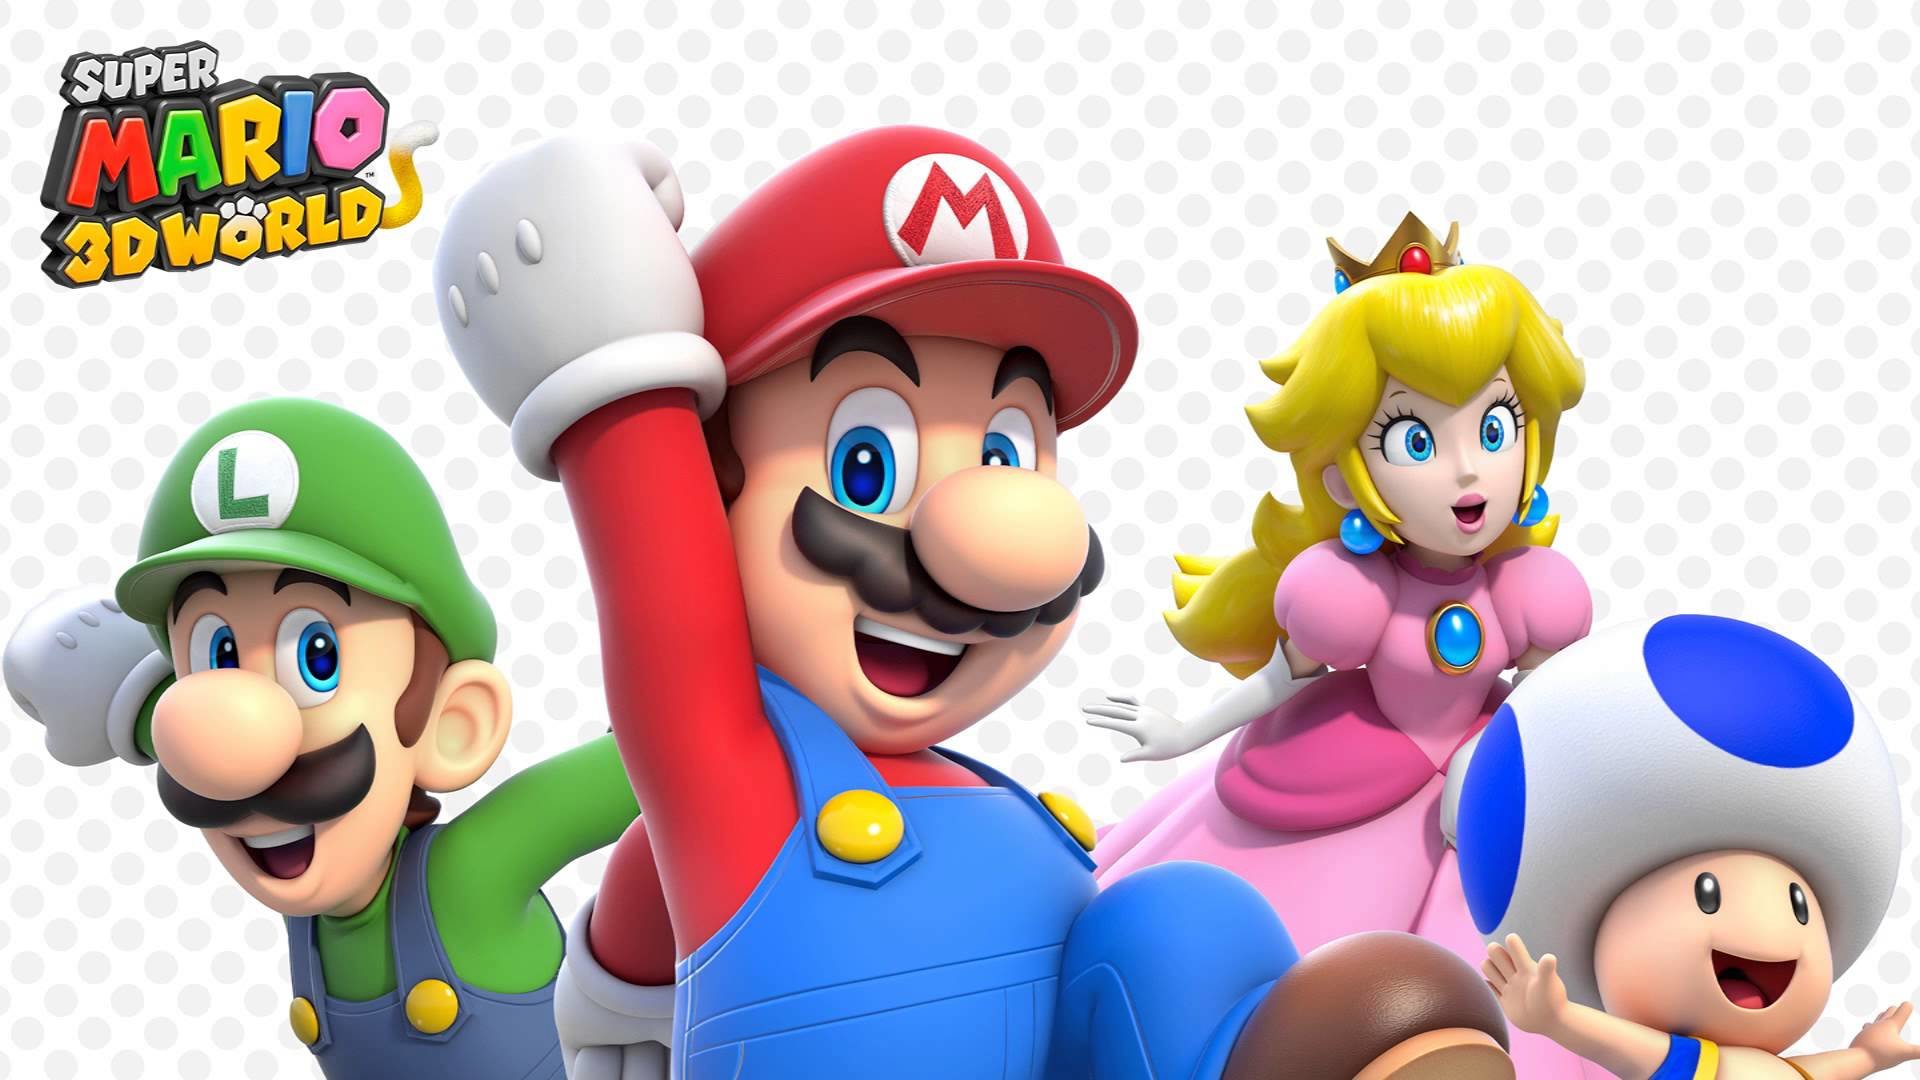 Awesome Super Mario 3D World free wallpaper ID:136970 for full hd computer